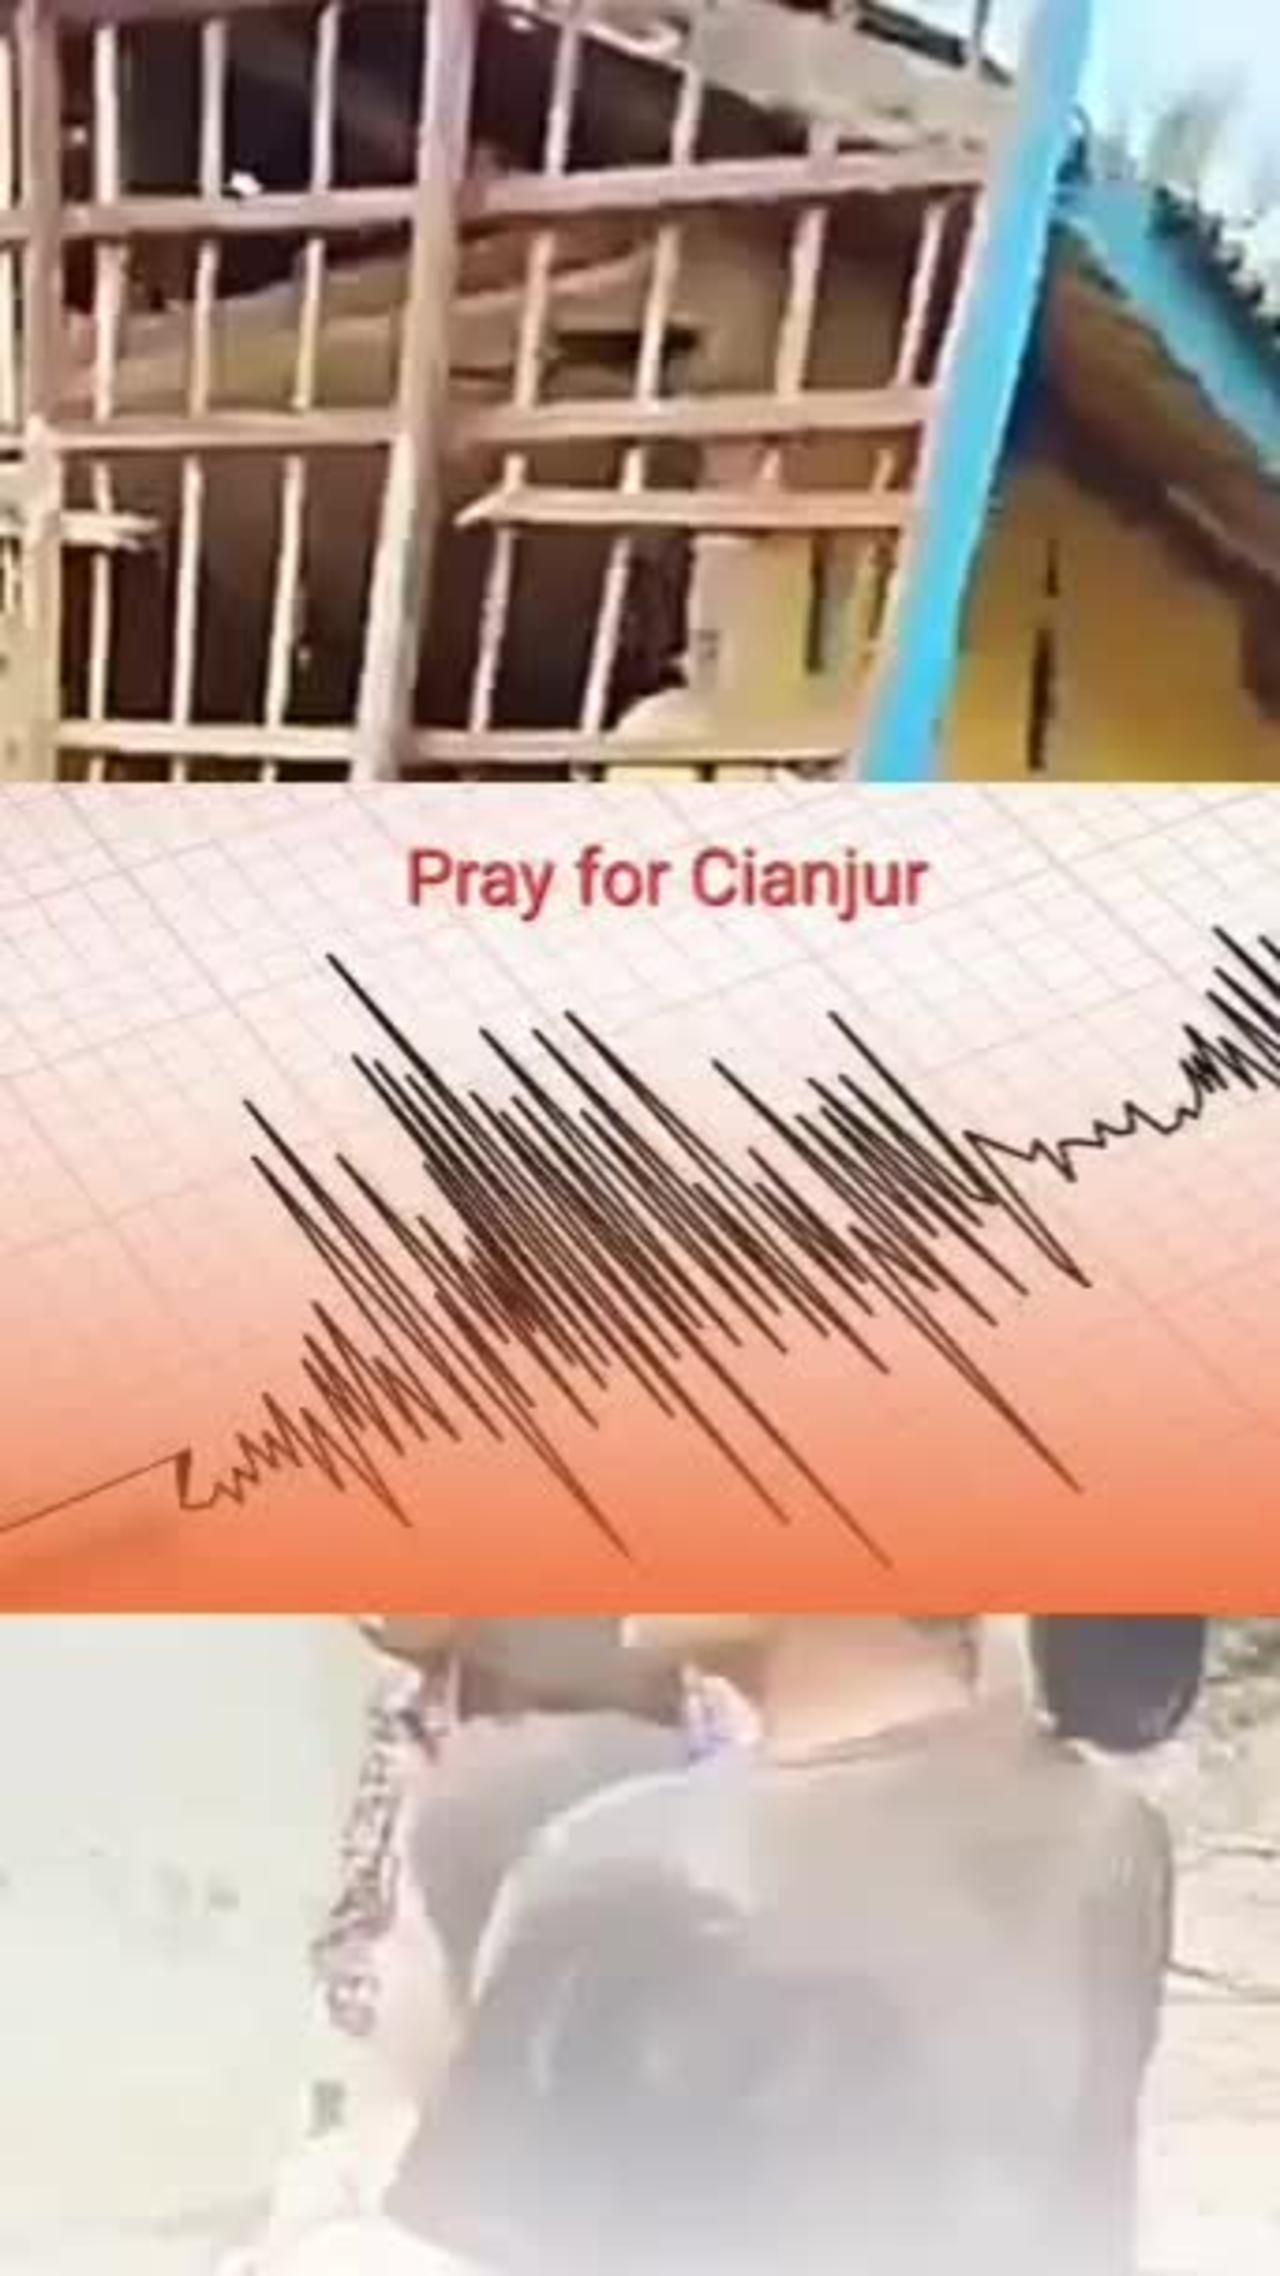 56 people died after the M 5.6 earthquake in Cianjur district - West Java Indonesia